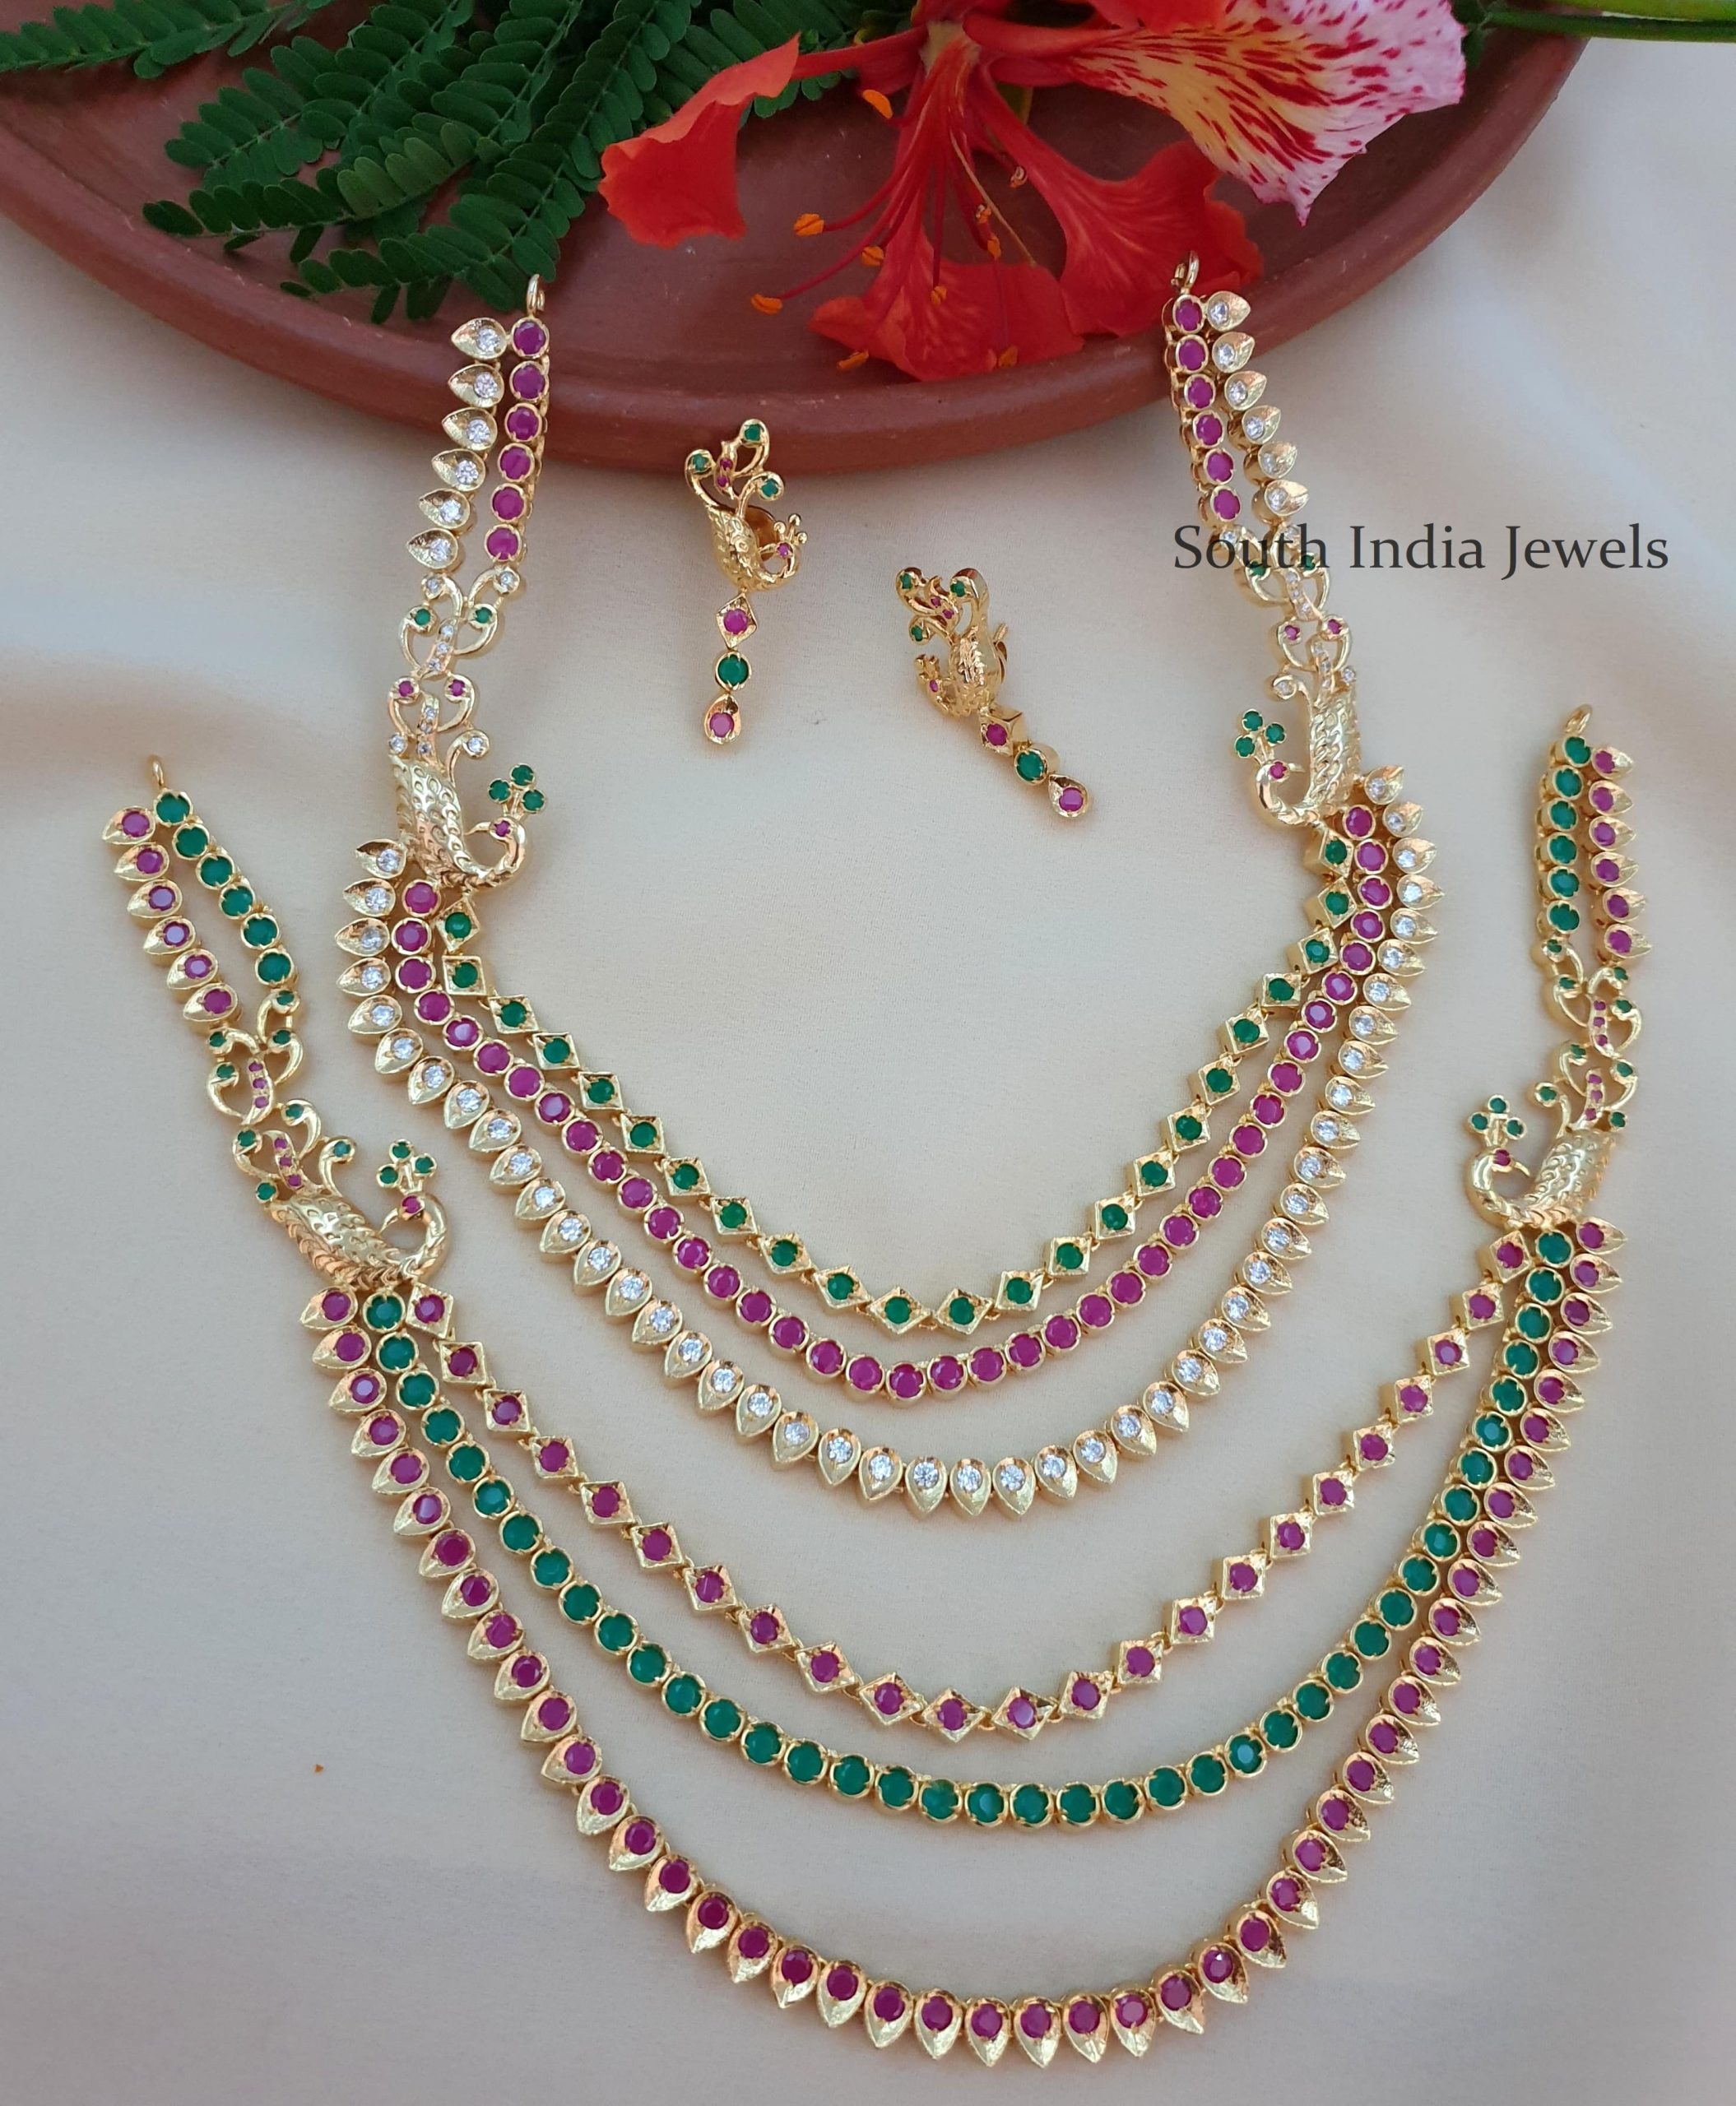 Fascinating Peacock Design Layered Necklace Set